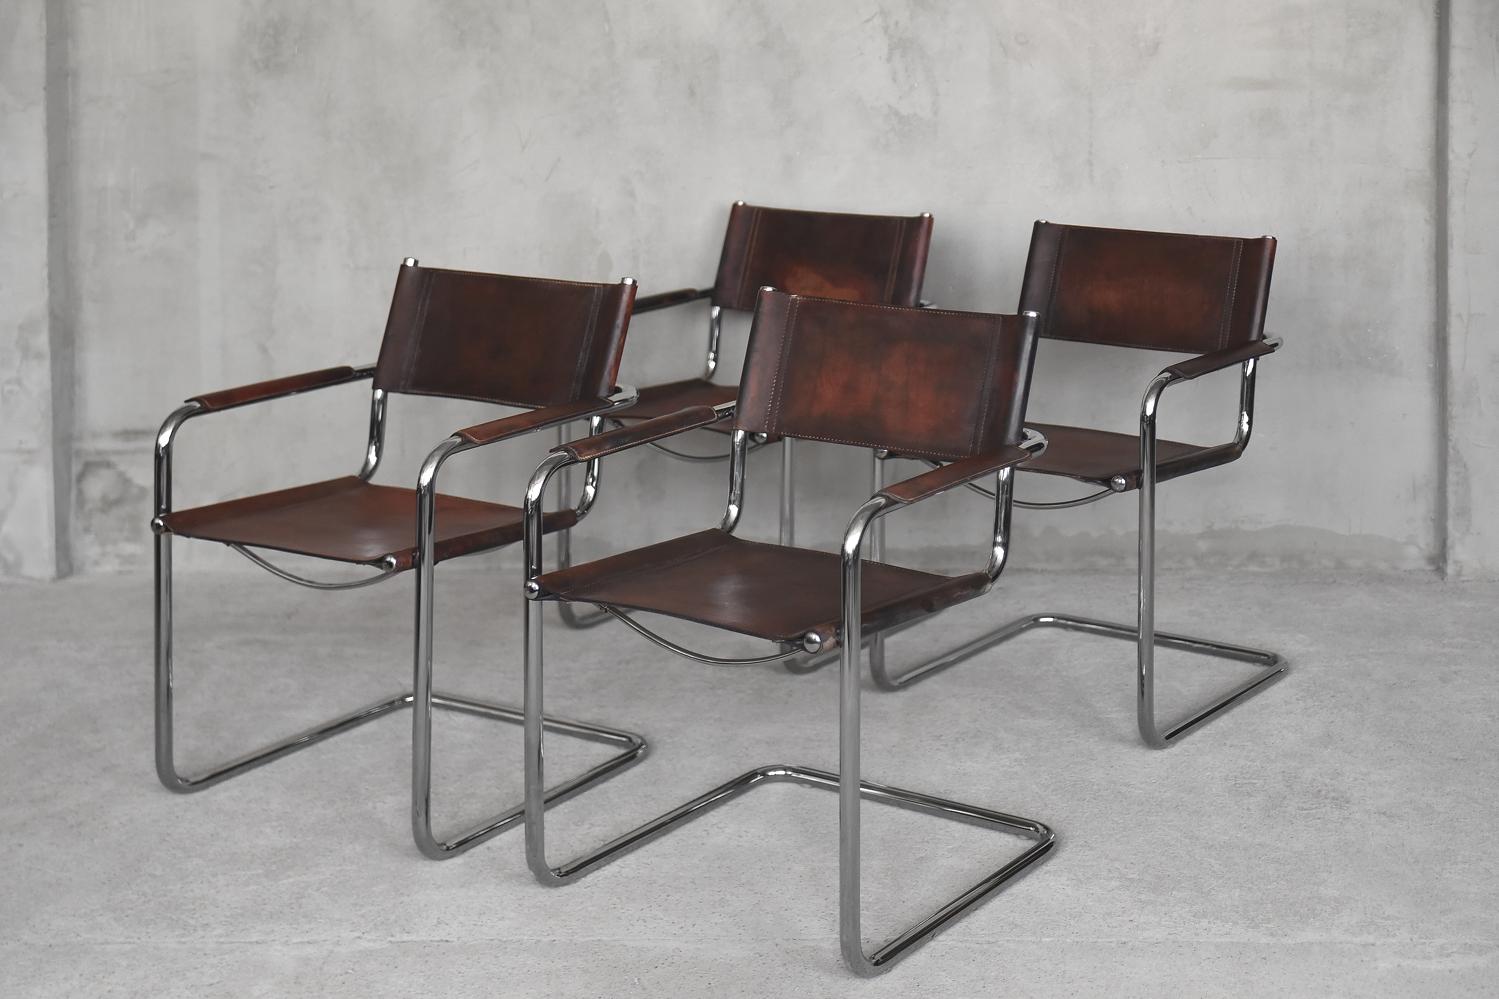 This set of four classic MG5 cantilever chairs was designed by Centro Studi architects for Matteo Grassi. These Bauhaus style chairs were originally manufactured in Italy during the 1960s. The chairs feature beautiful and thick patinated leather